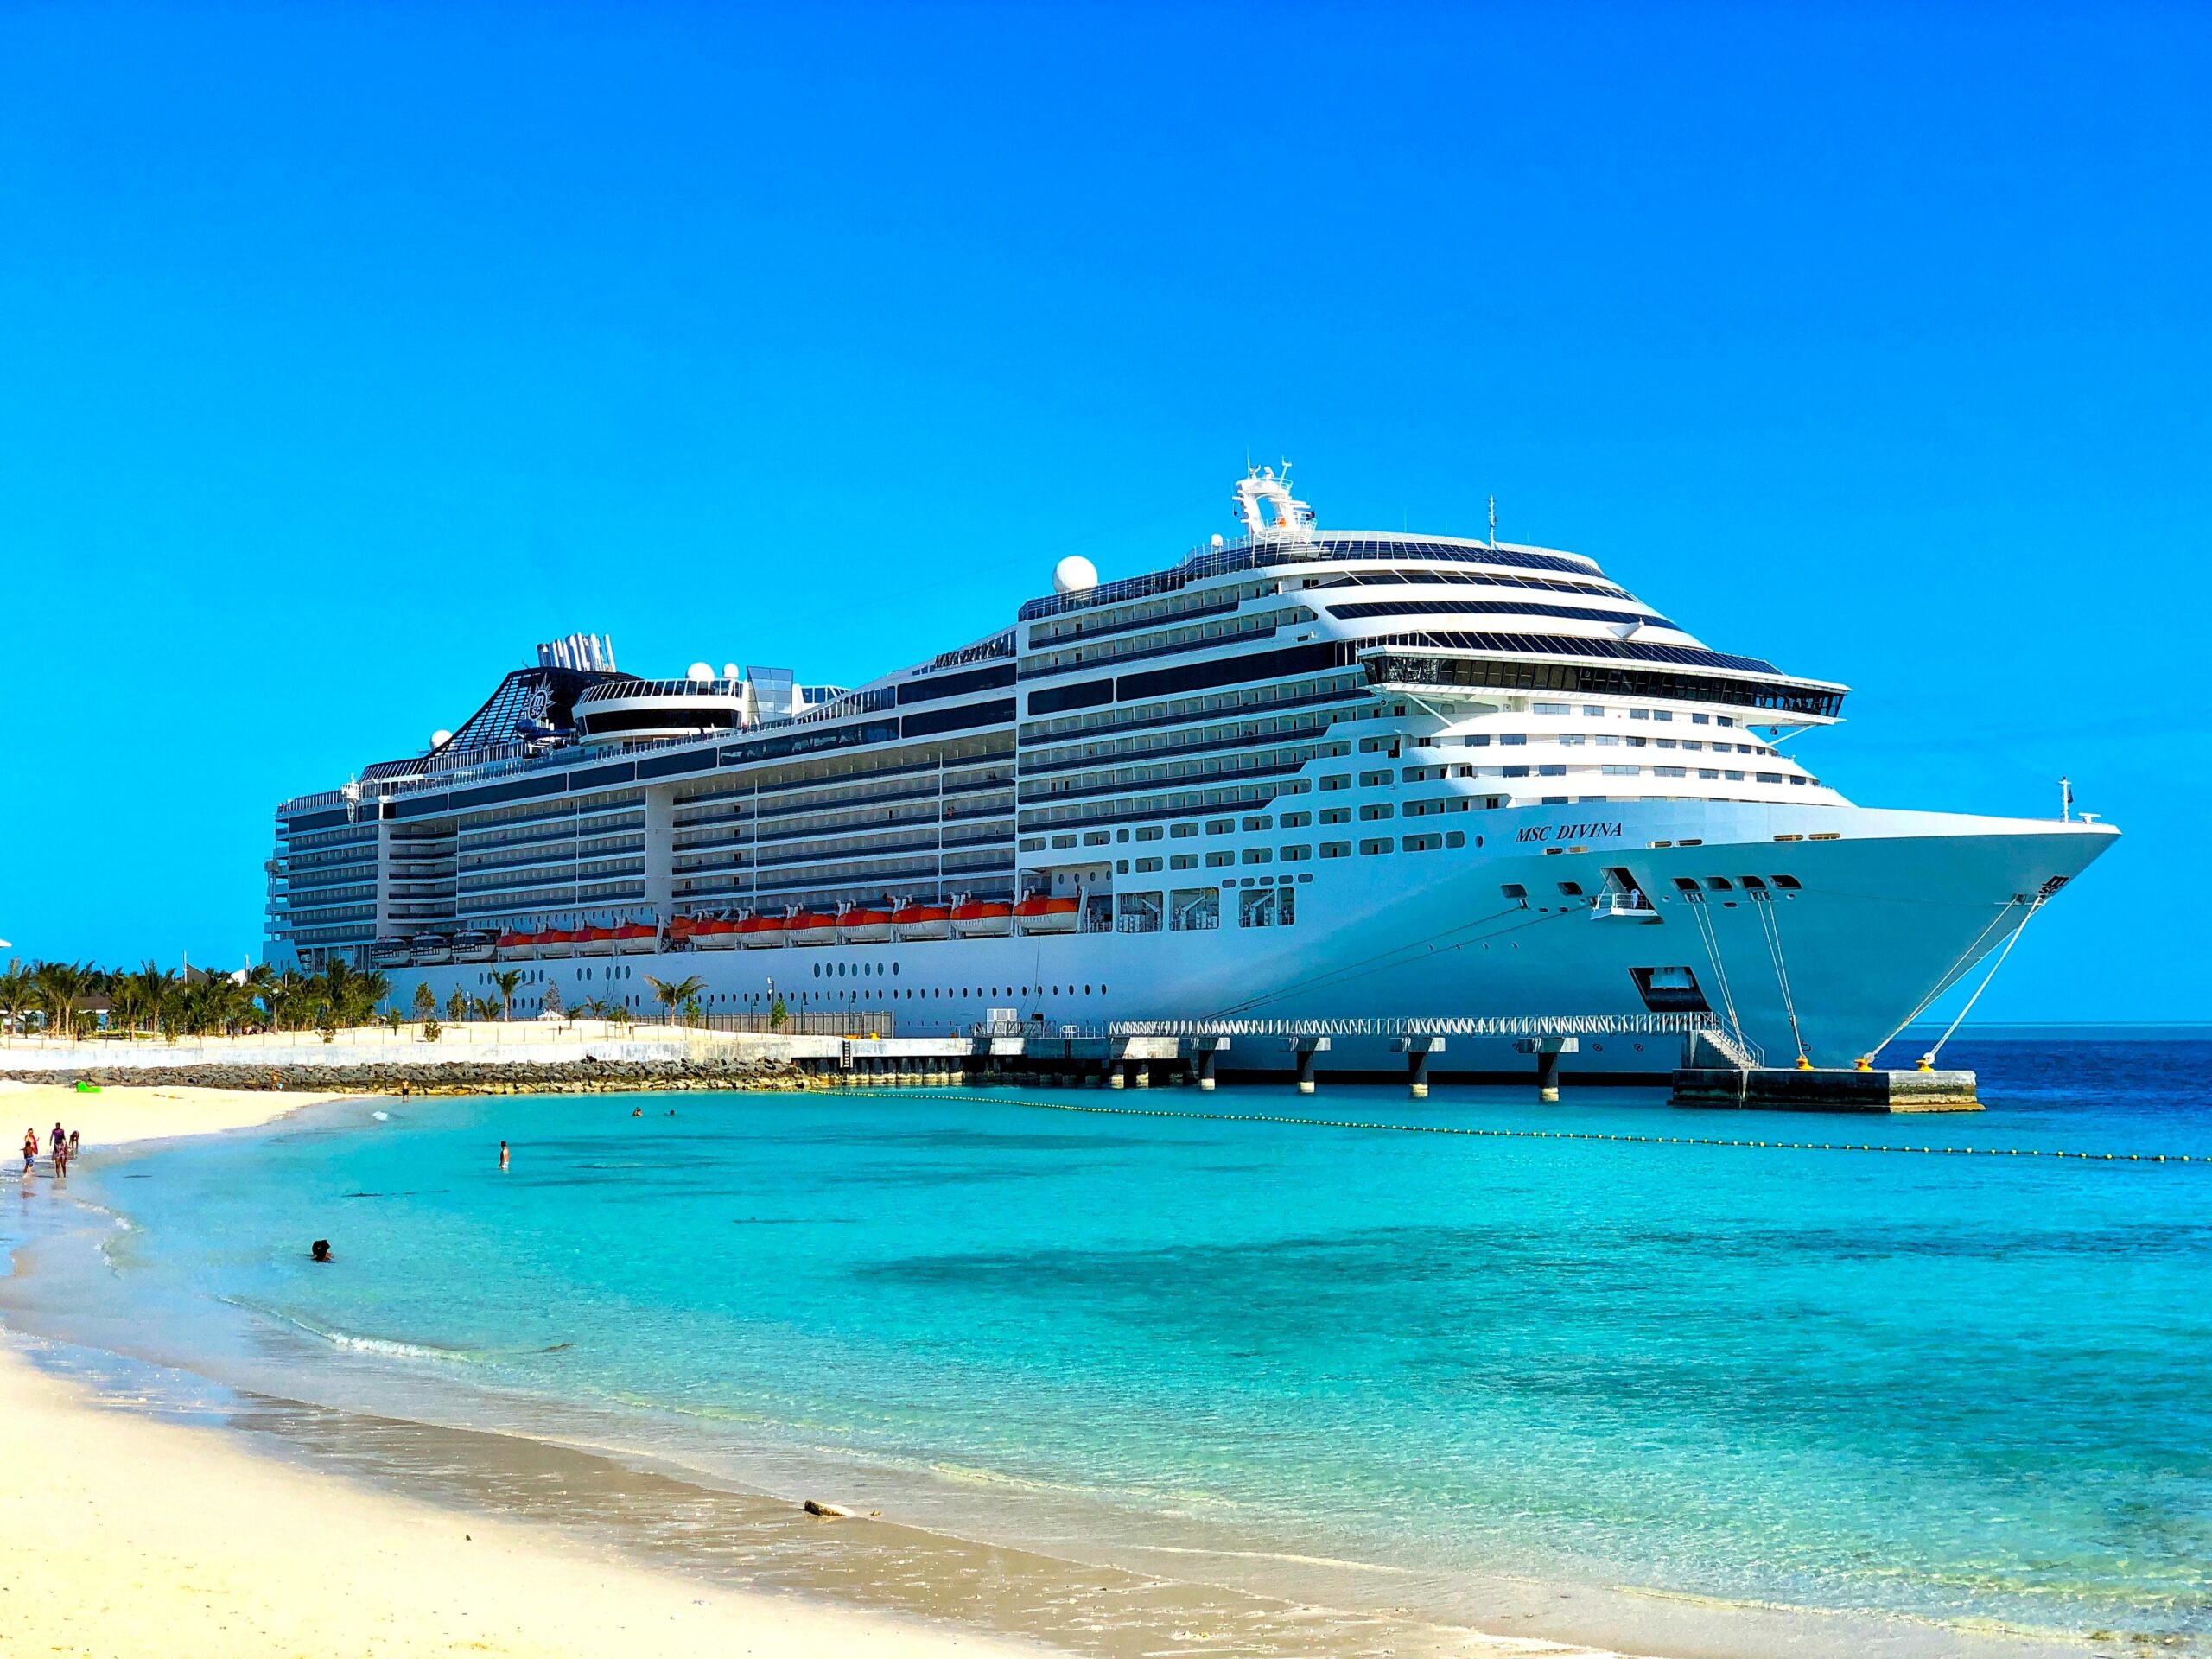 What should I know before going on a cruise